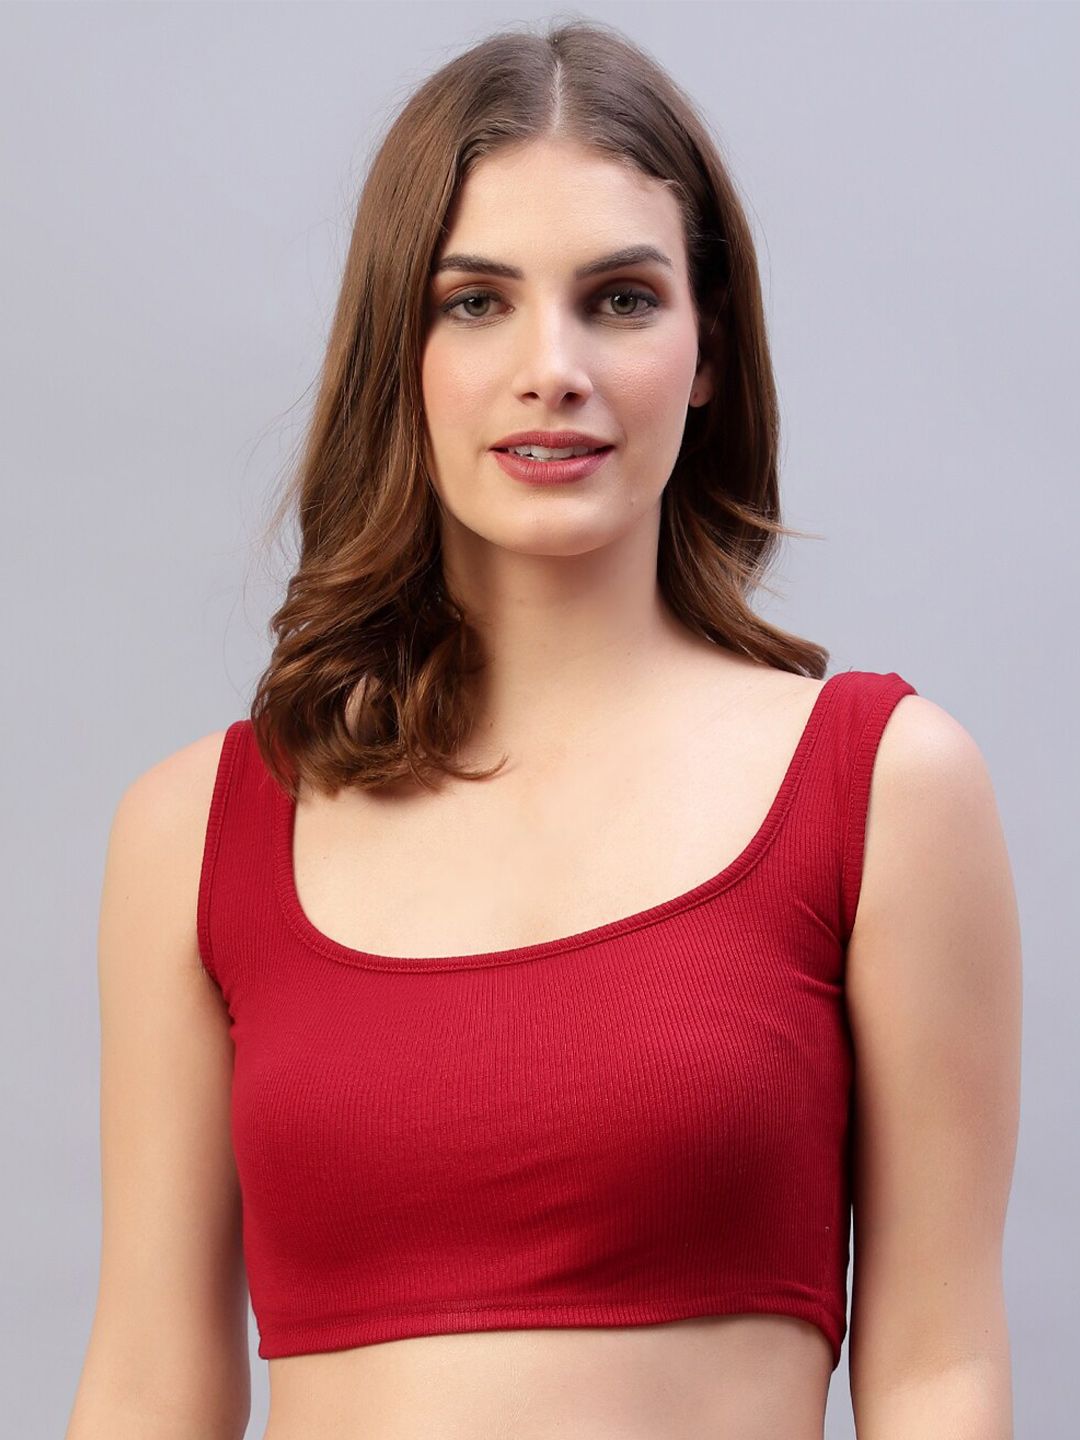 DIAZ Scoop Neck Fitted Crop Top Price in India